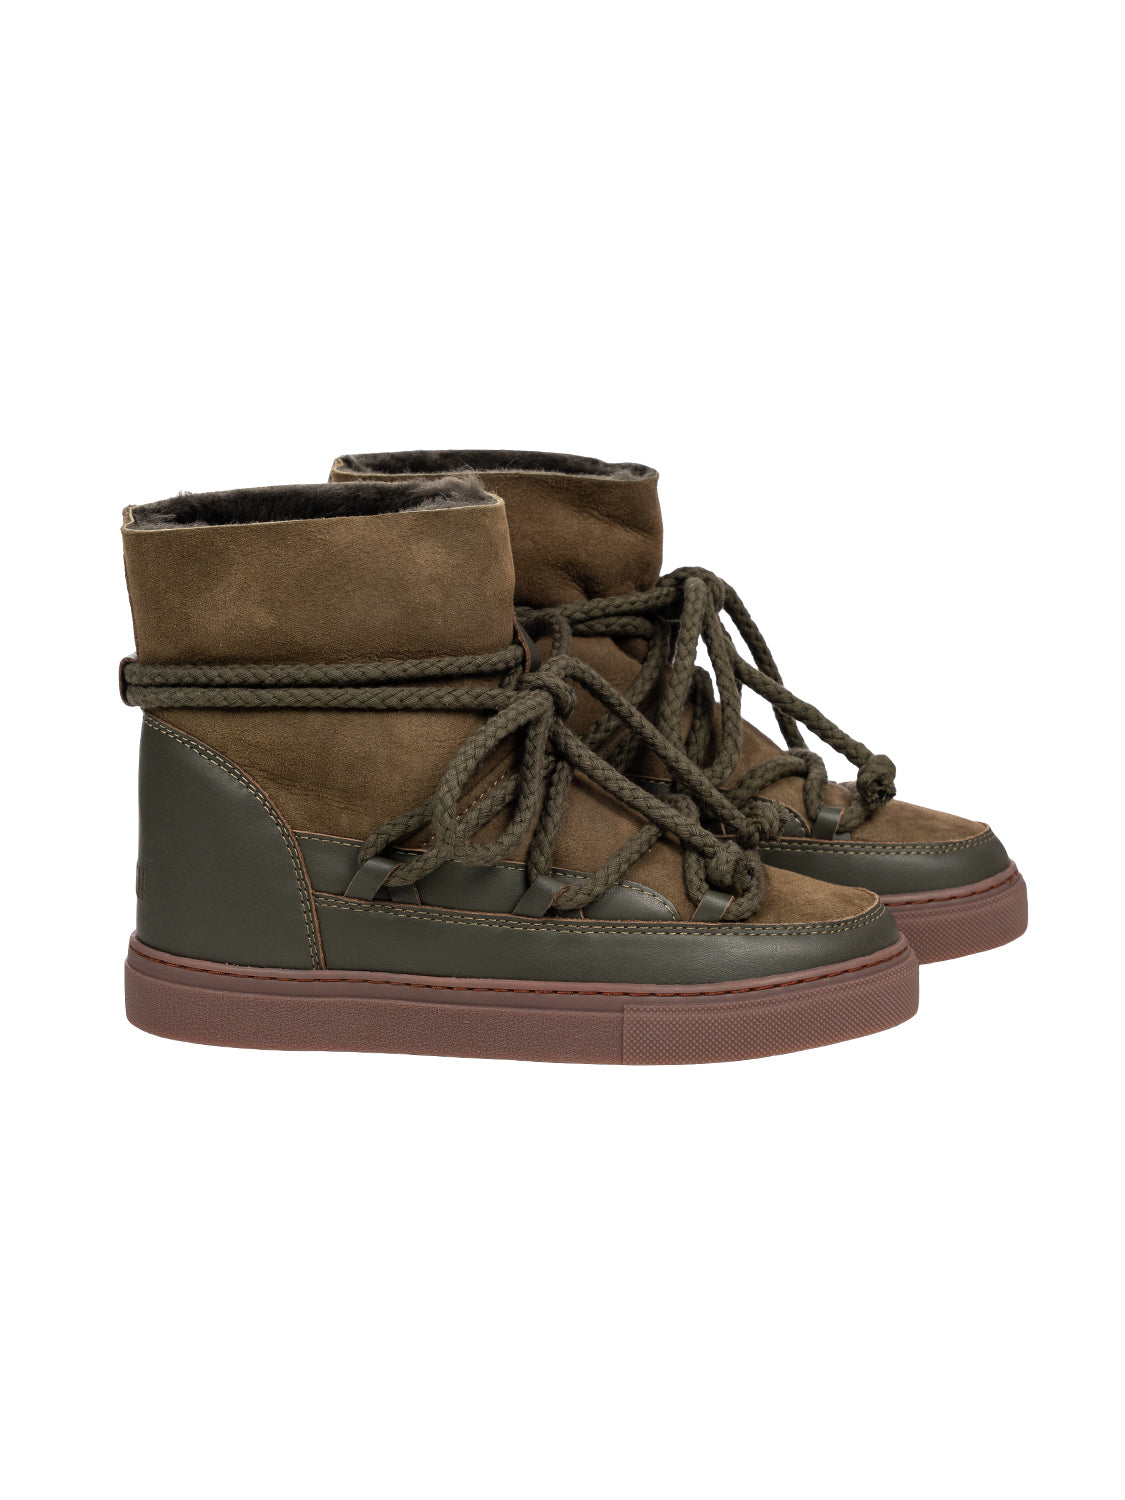 Patchwork Boots Olive